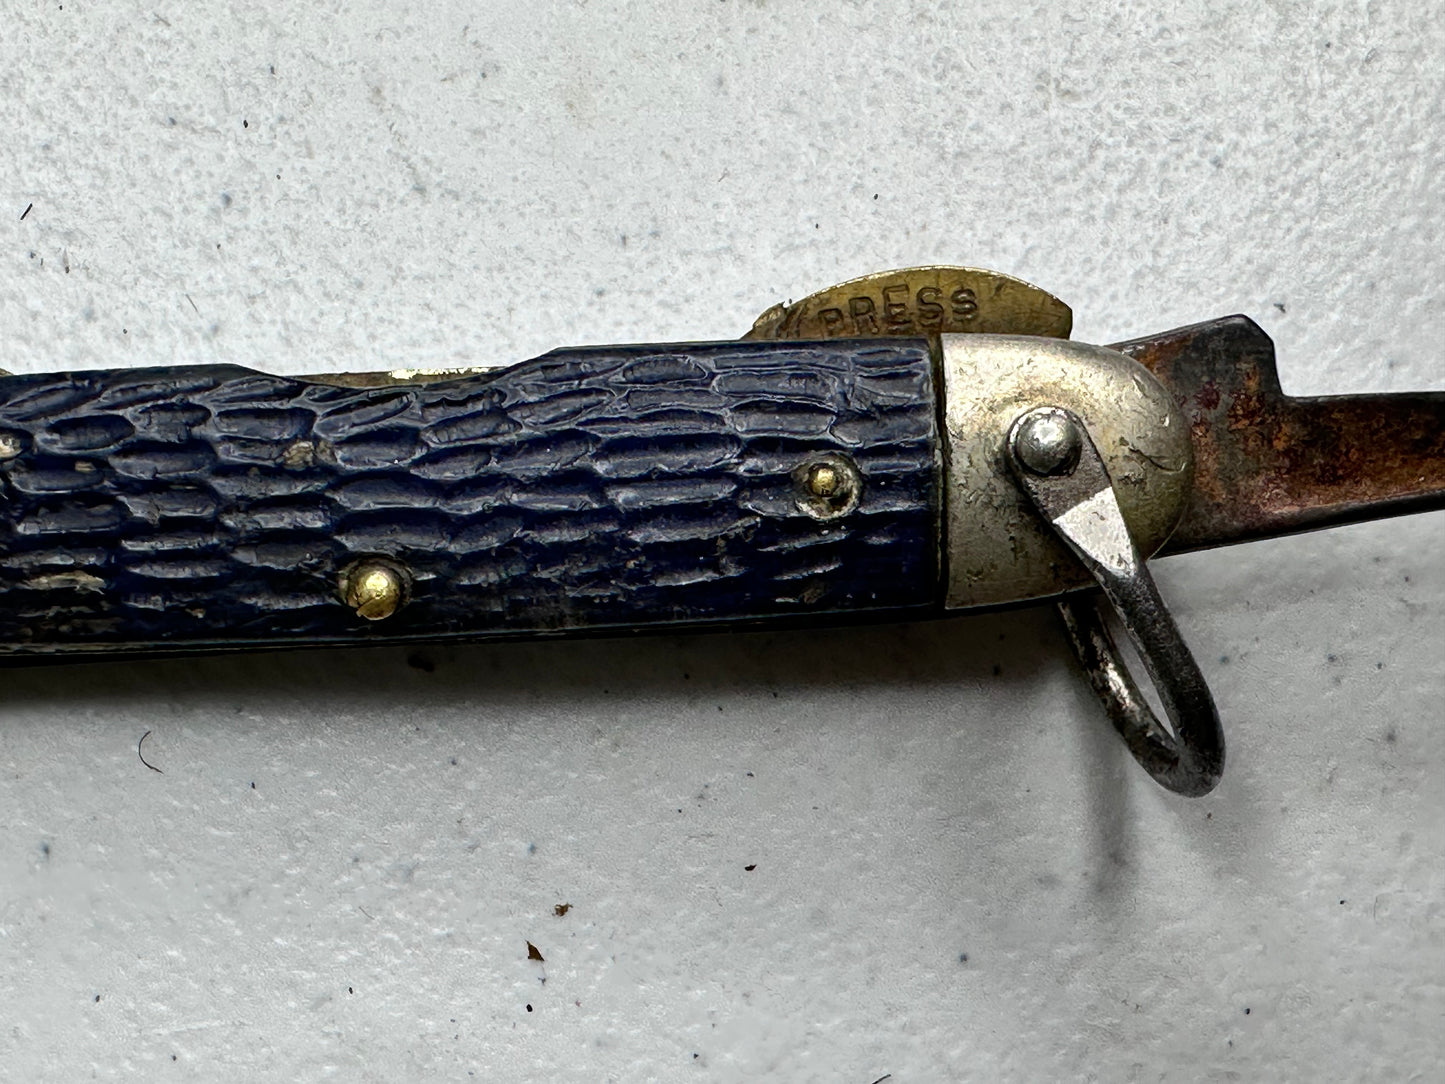 Vintage 1960s Camillus Cub Scouts Pocket Knife - Rare Multi-Tool Collectible